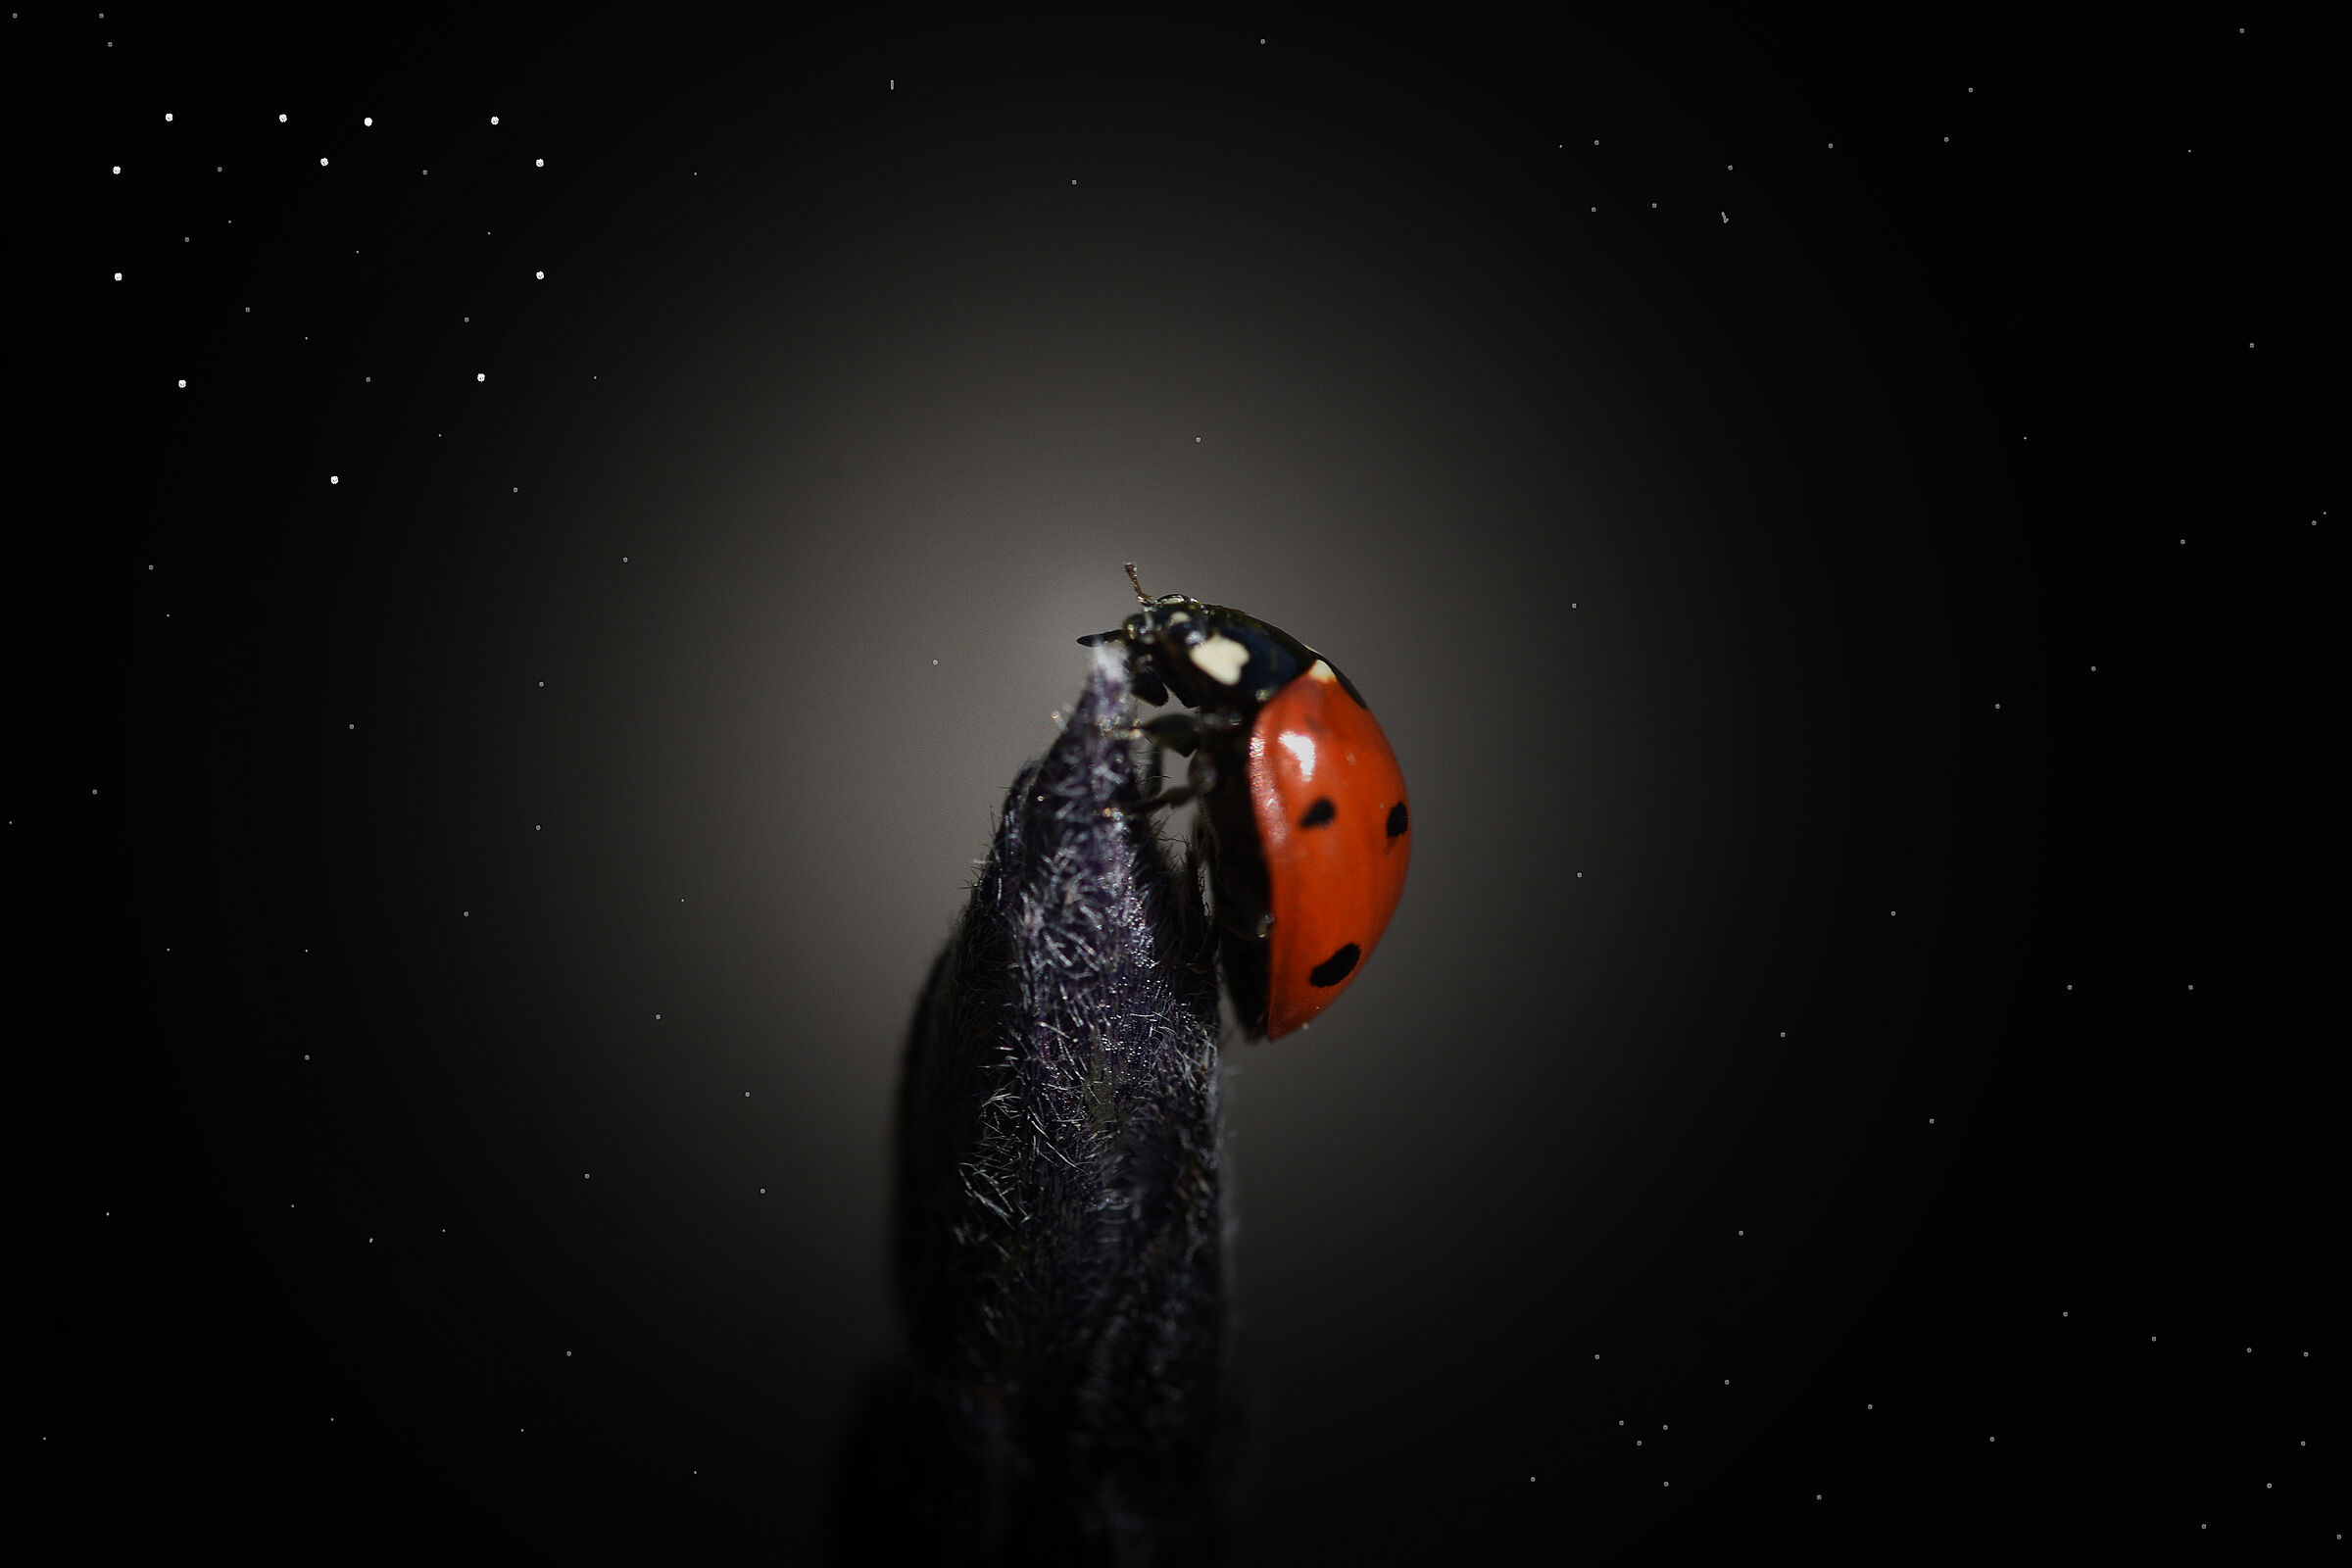 Ladybug and the constellation of the heart,...